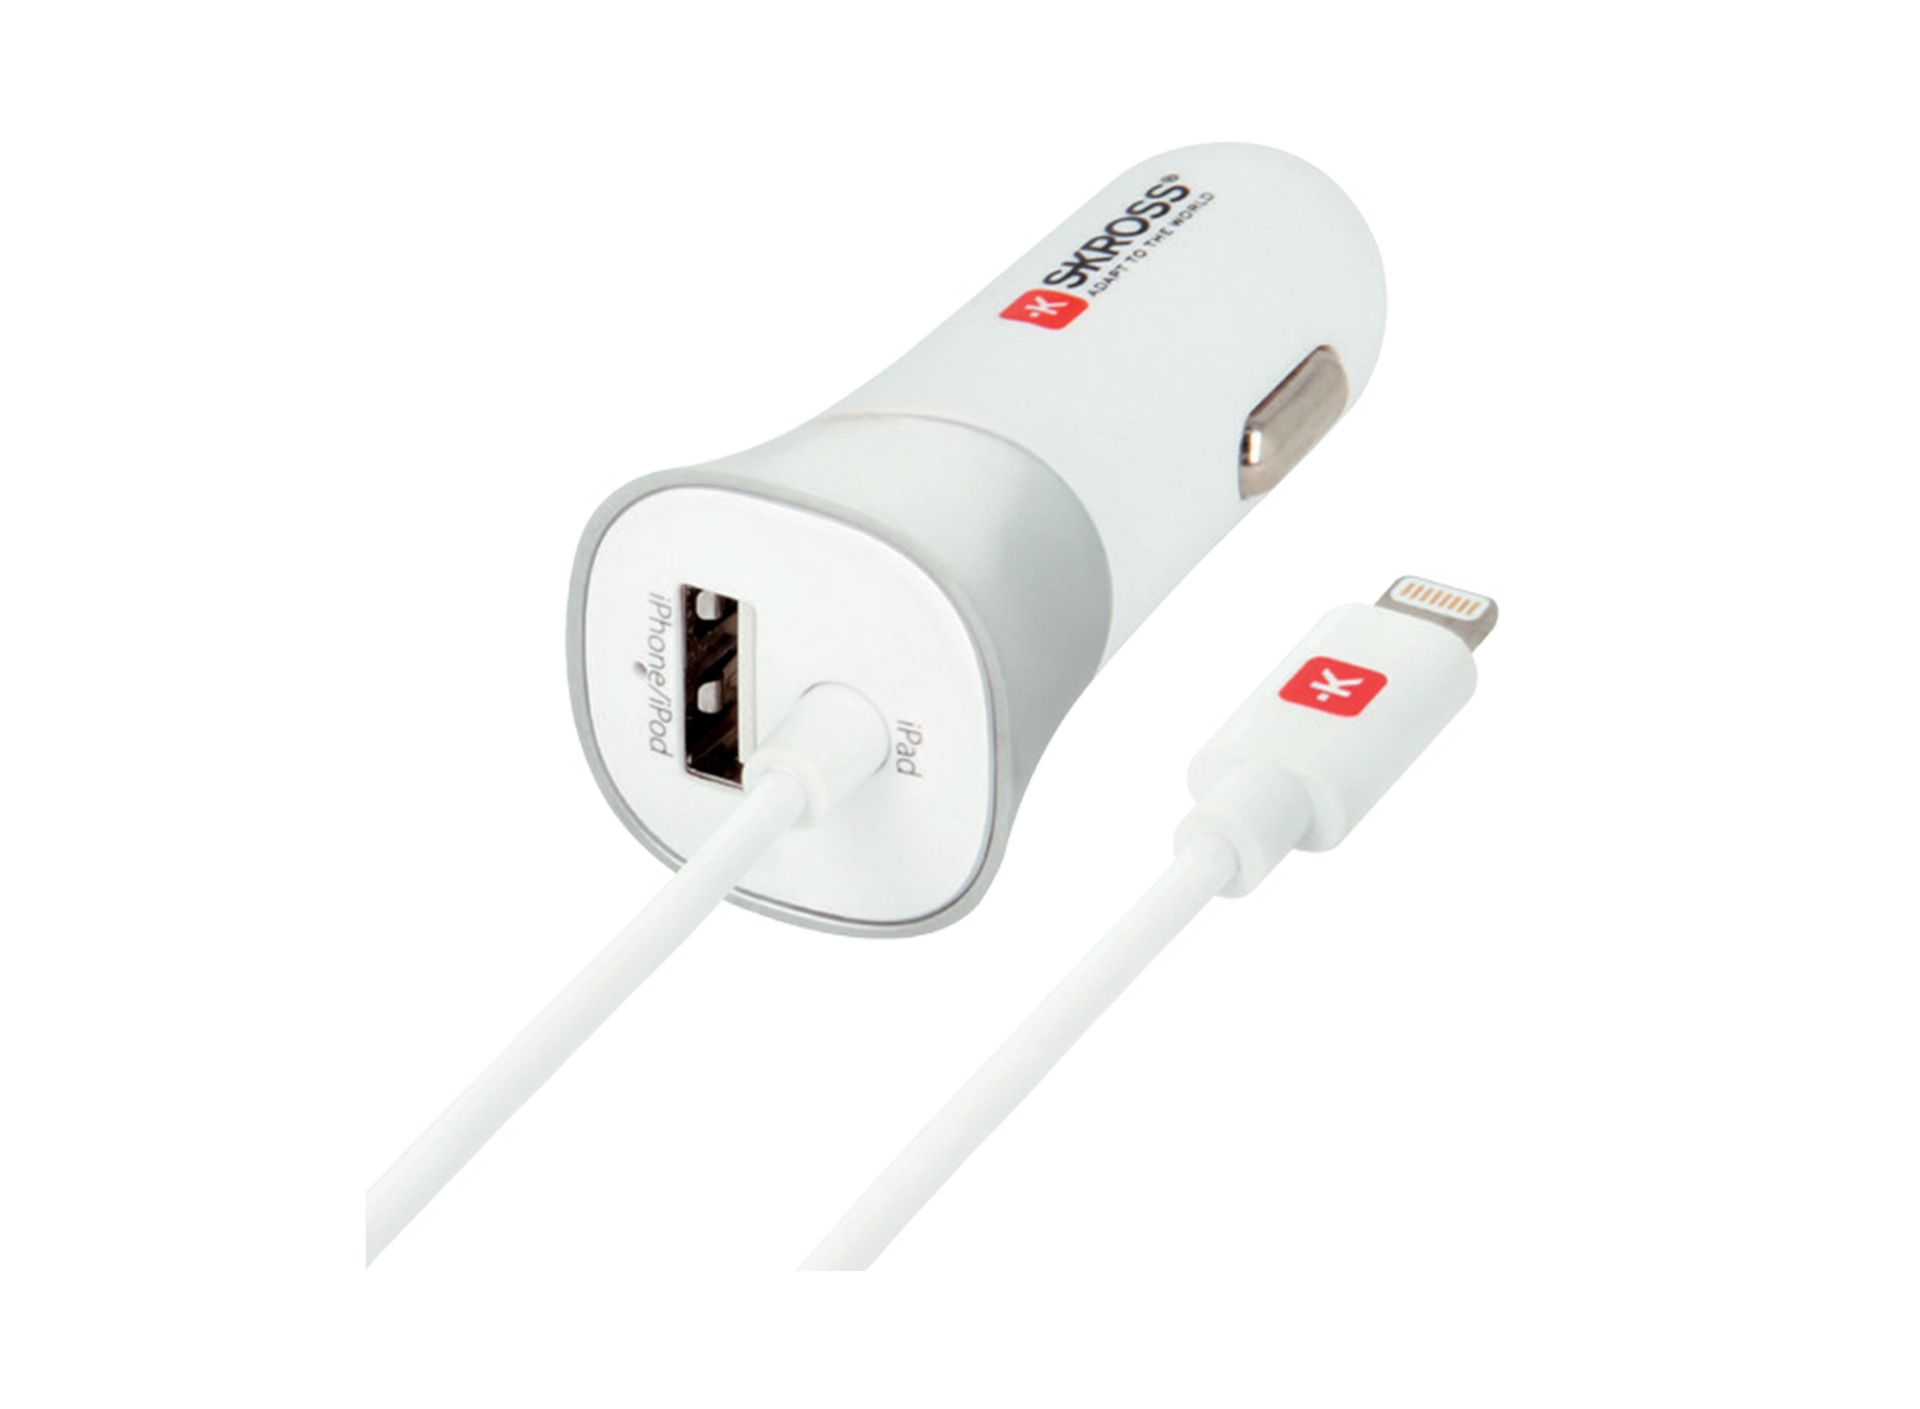 Skross USB Car Charger with lightning cable angled